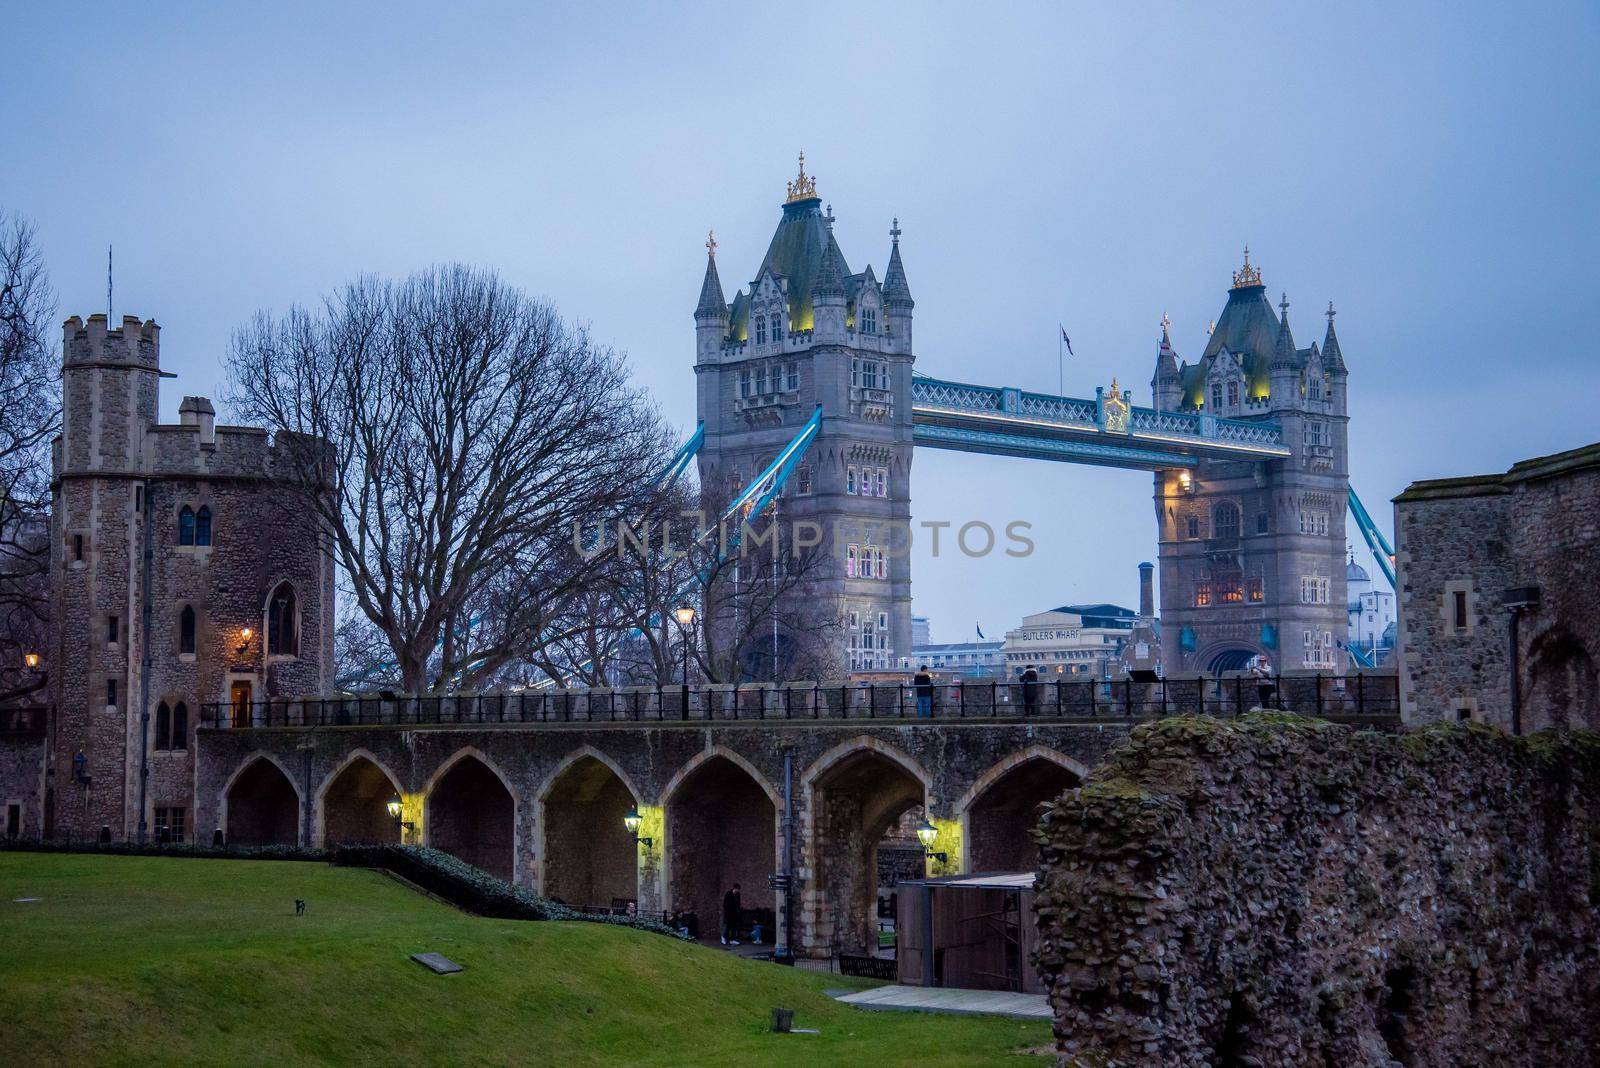 Iconic Tower Bridge from the Tower of London castle vantage point London UK landmarks by jyurinko